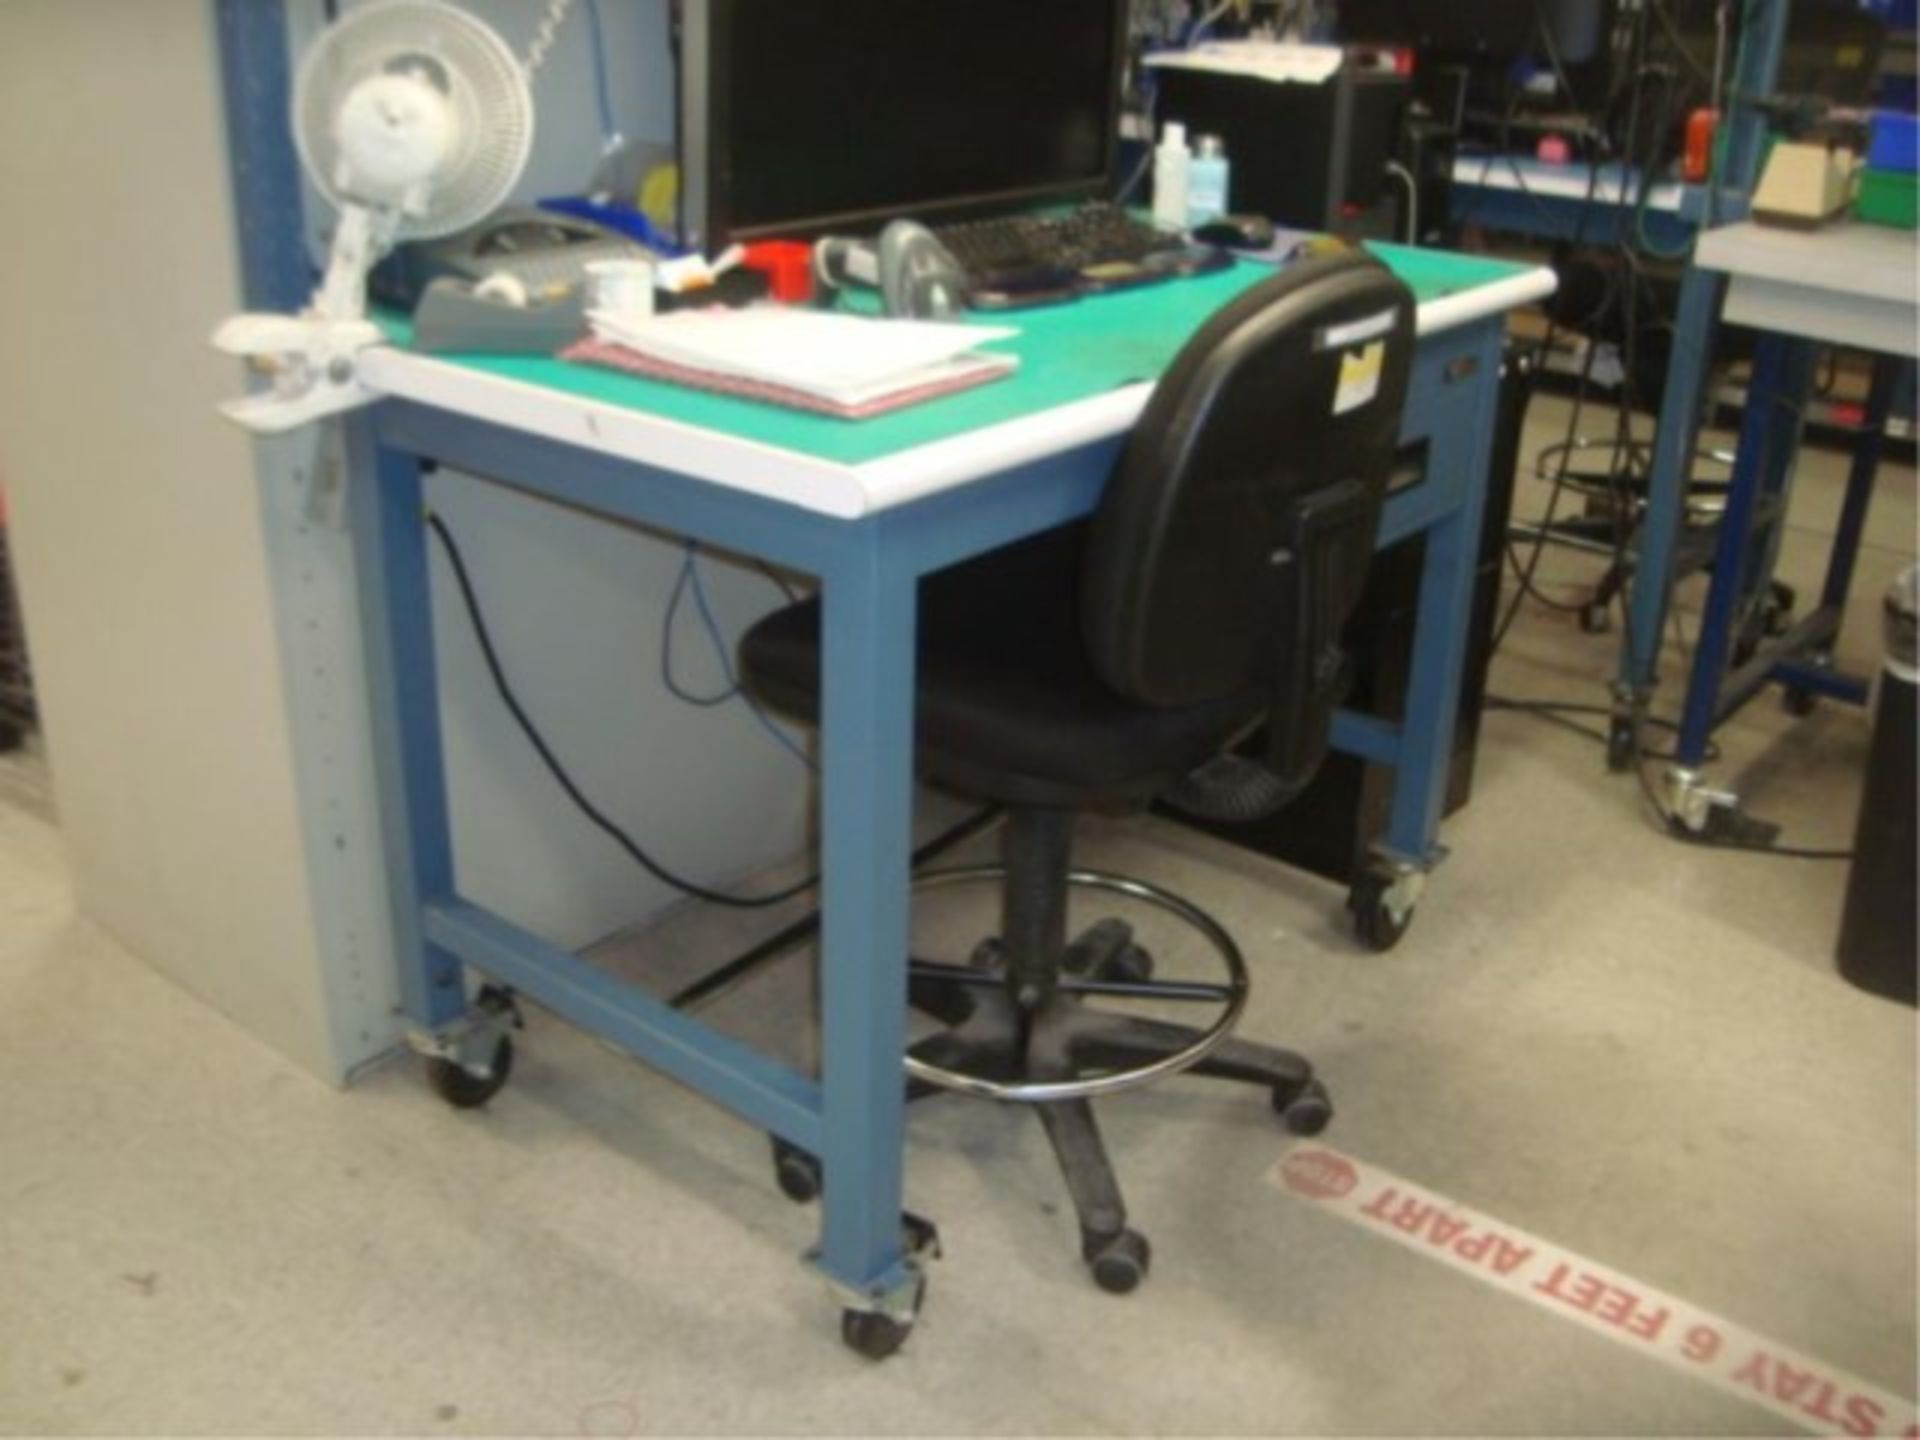 Mobile Workstation Benches - Image 6 of 9